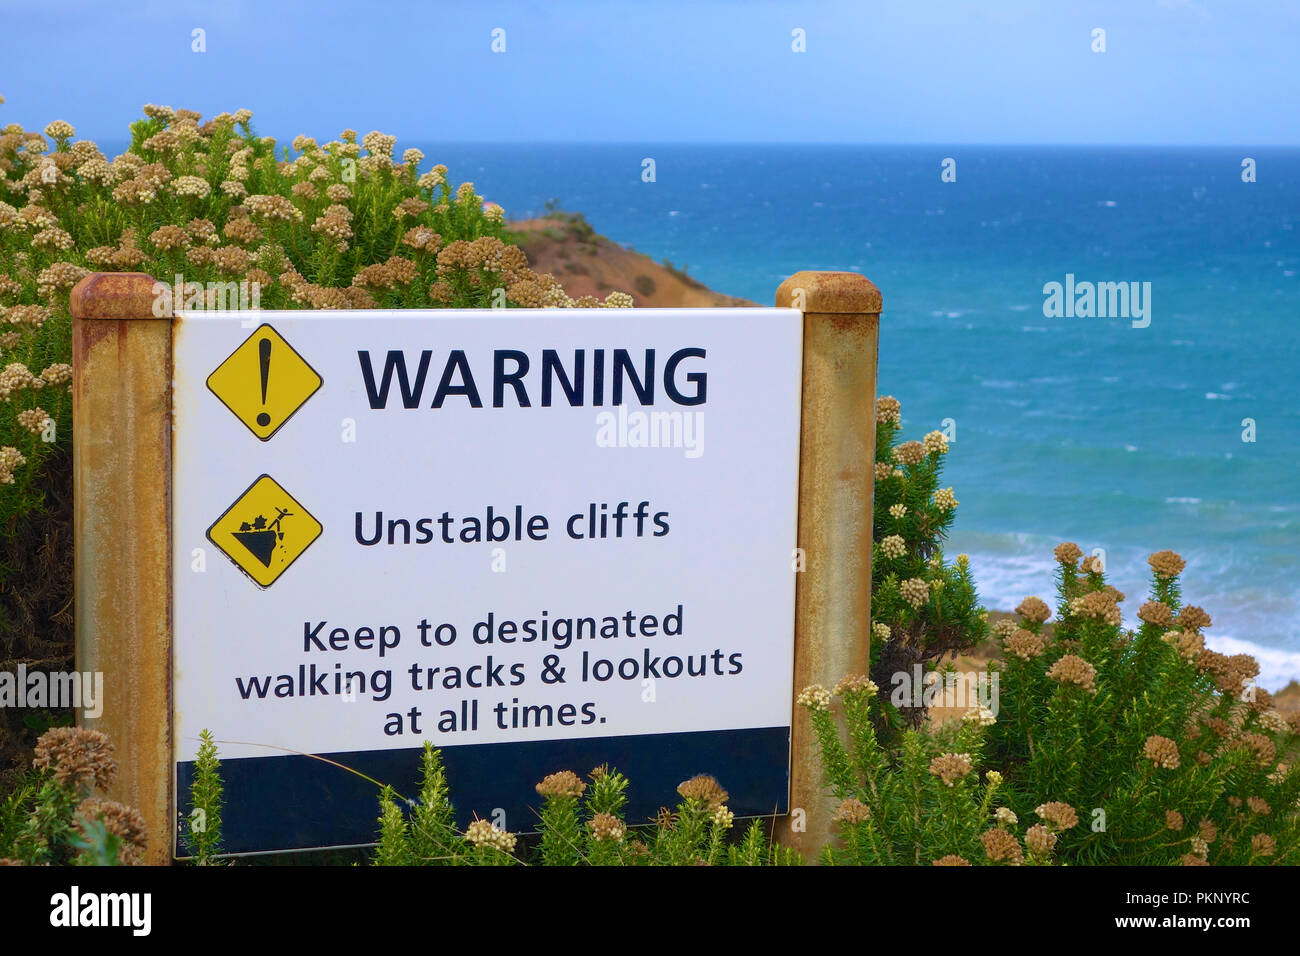 Warning sign about unstable cliffs. Stock Photo